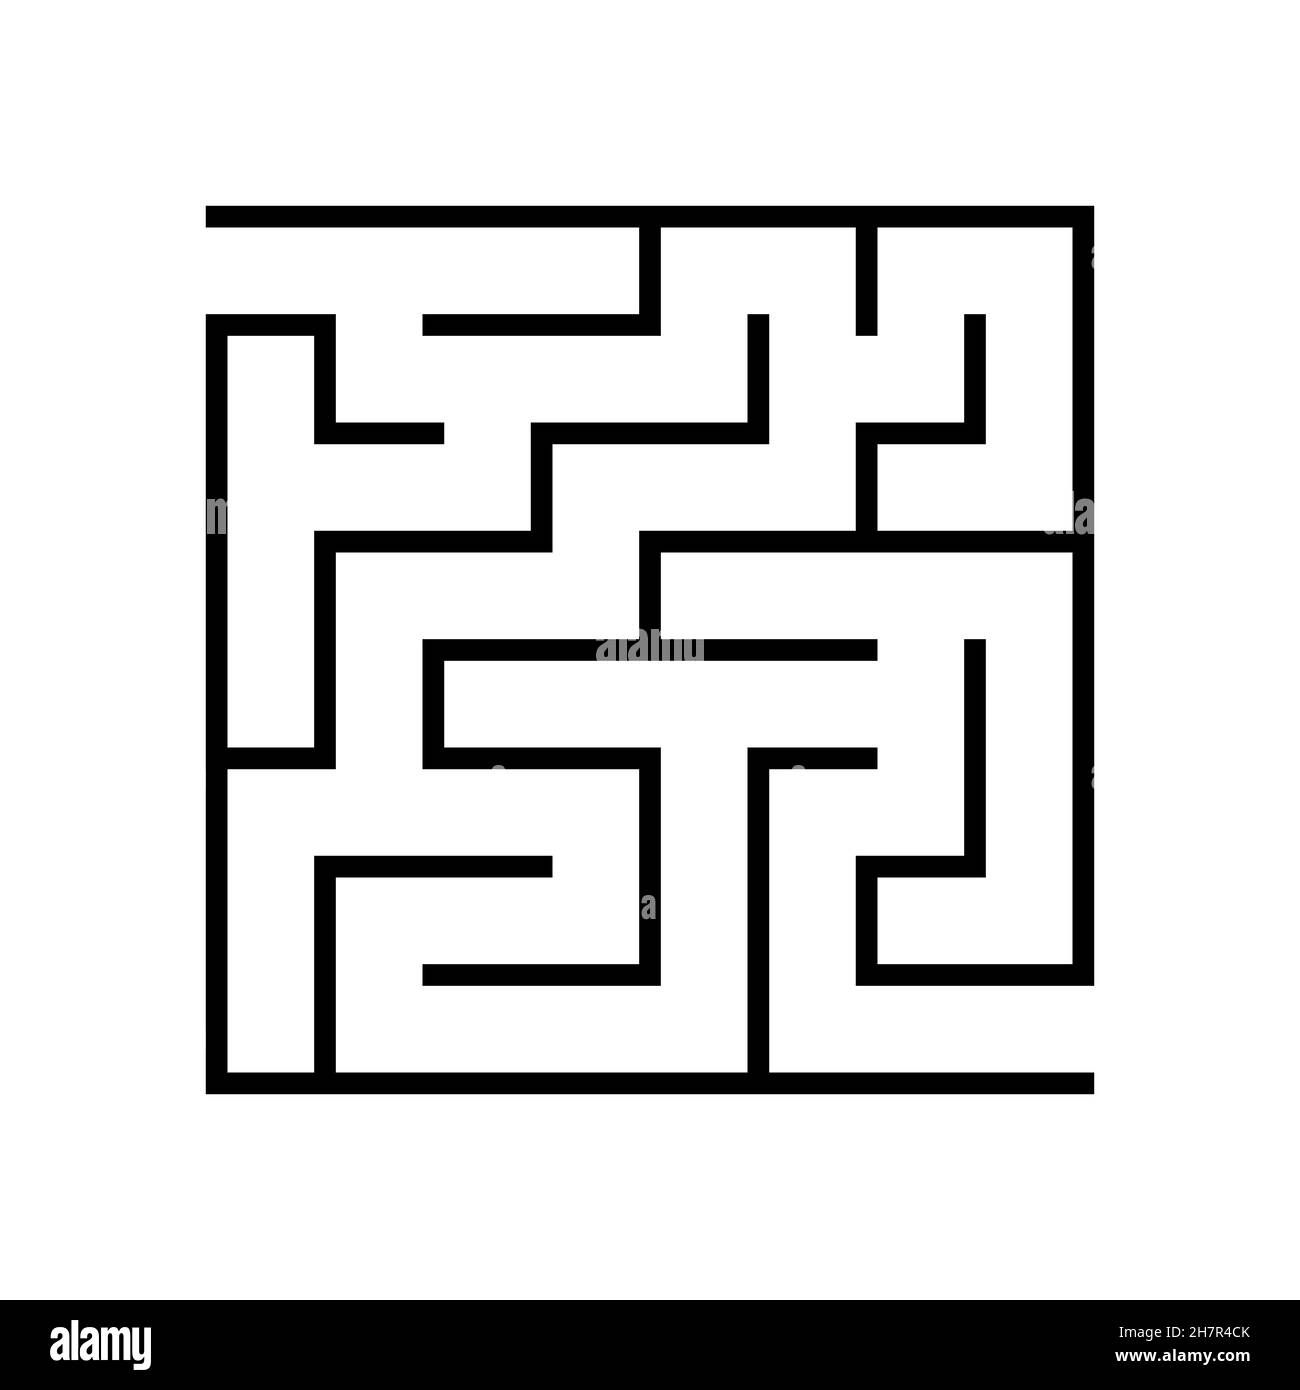 Education logic game labyrinth for kids. Find right way. Maze or puzzle design. Vector illustration. Stock Vector